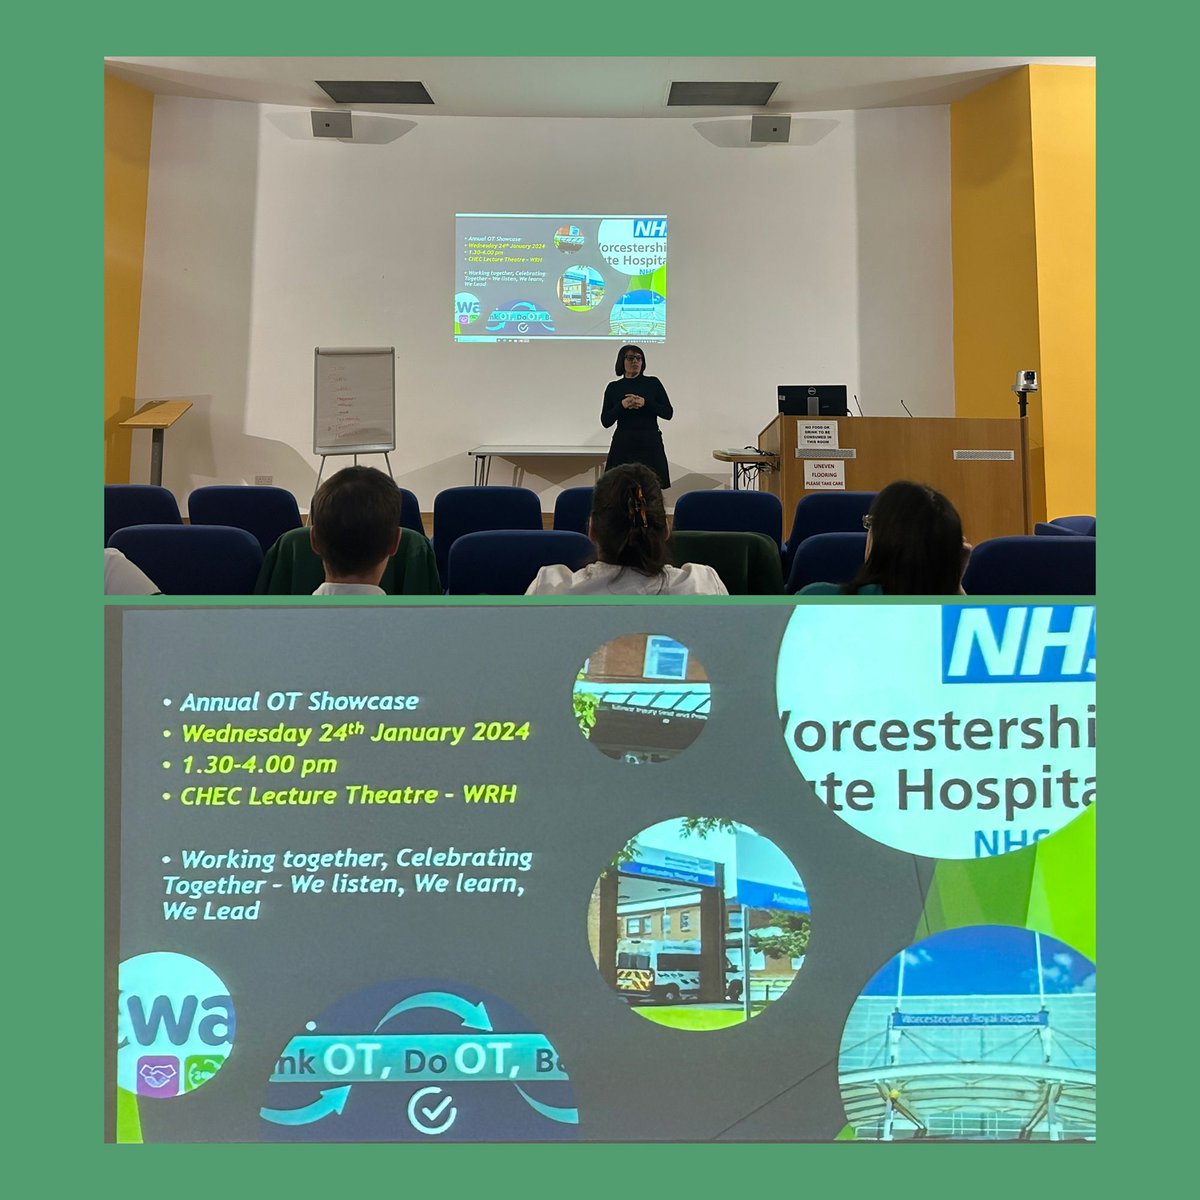 Yesterday we held our Annual Occupational Therapy Showcase…. An opportunity to share service developments and thank staff. We will be sharing highlights over the next few days 💚 #WorkTogetherCelebrateTogether